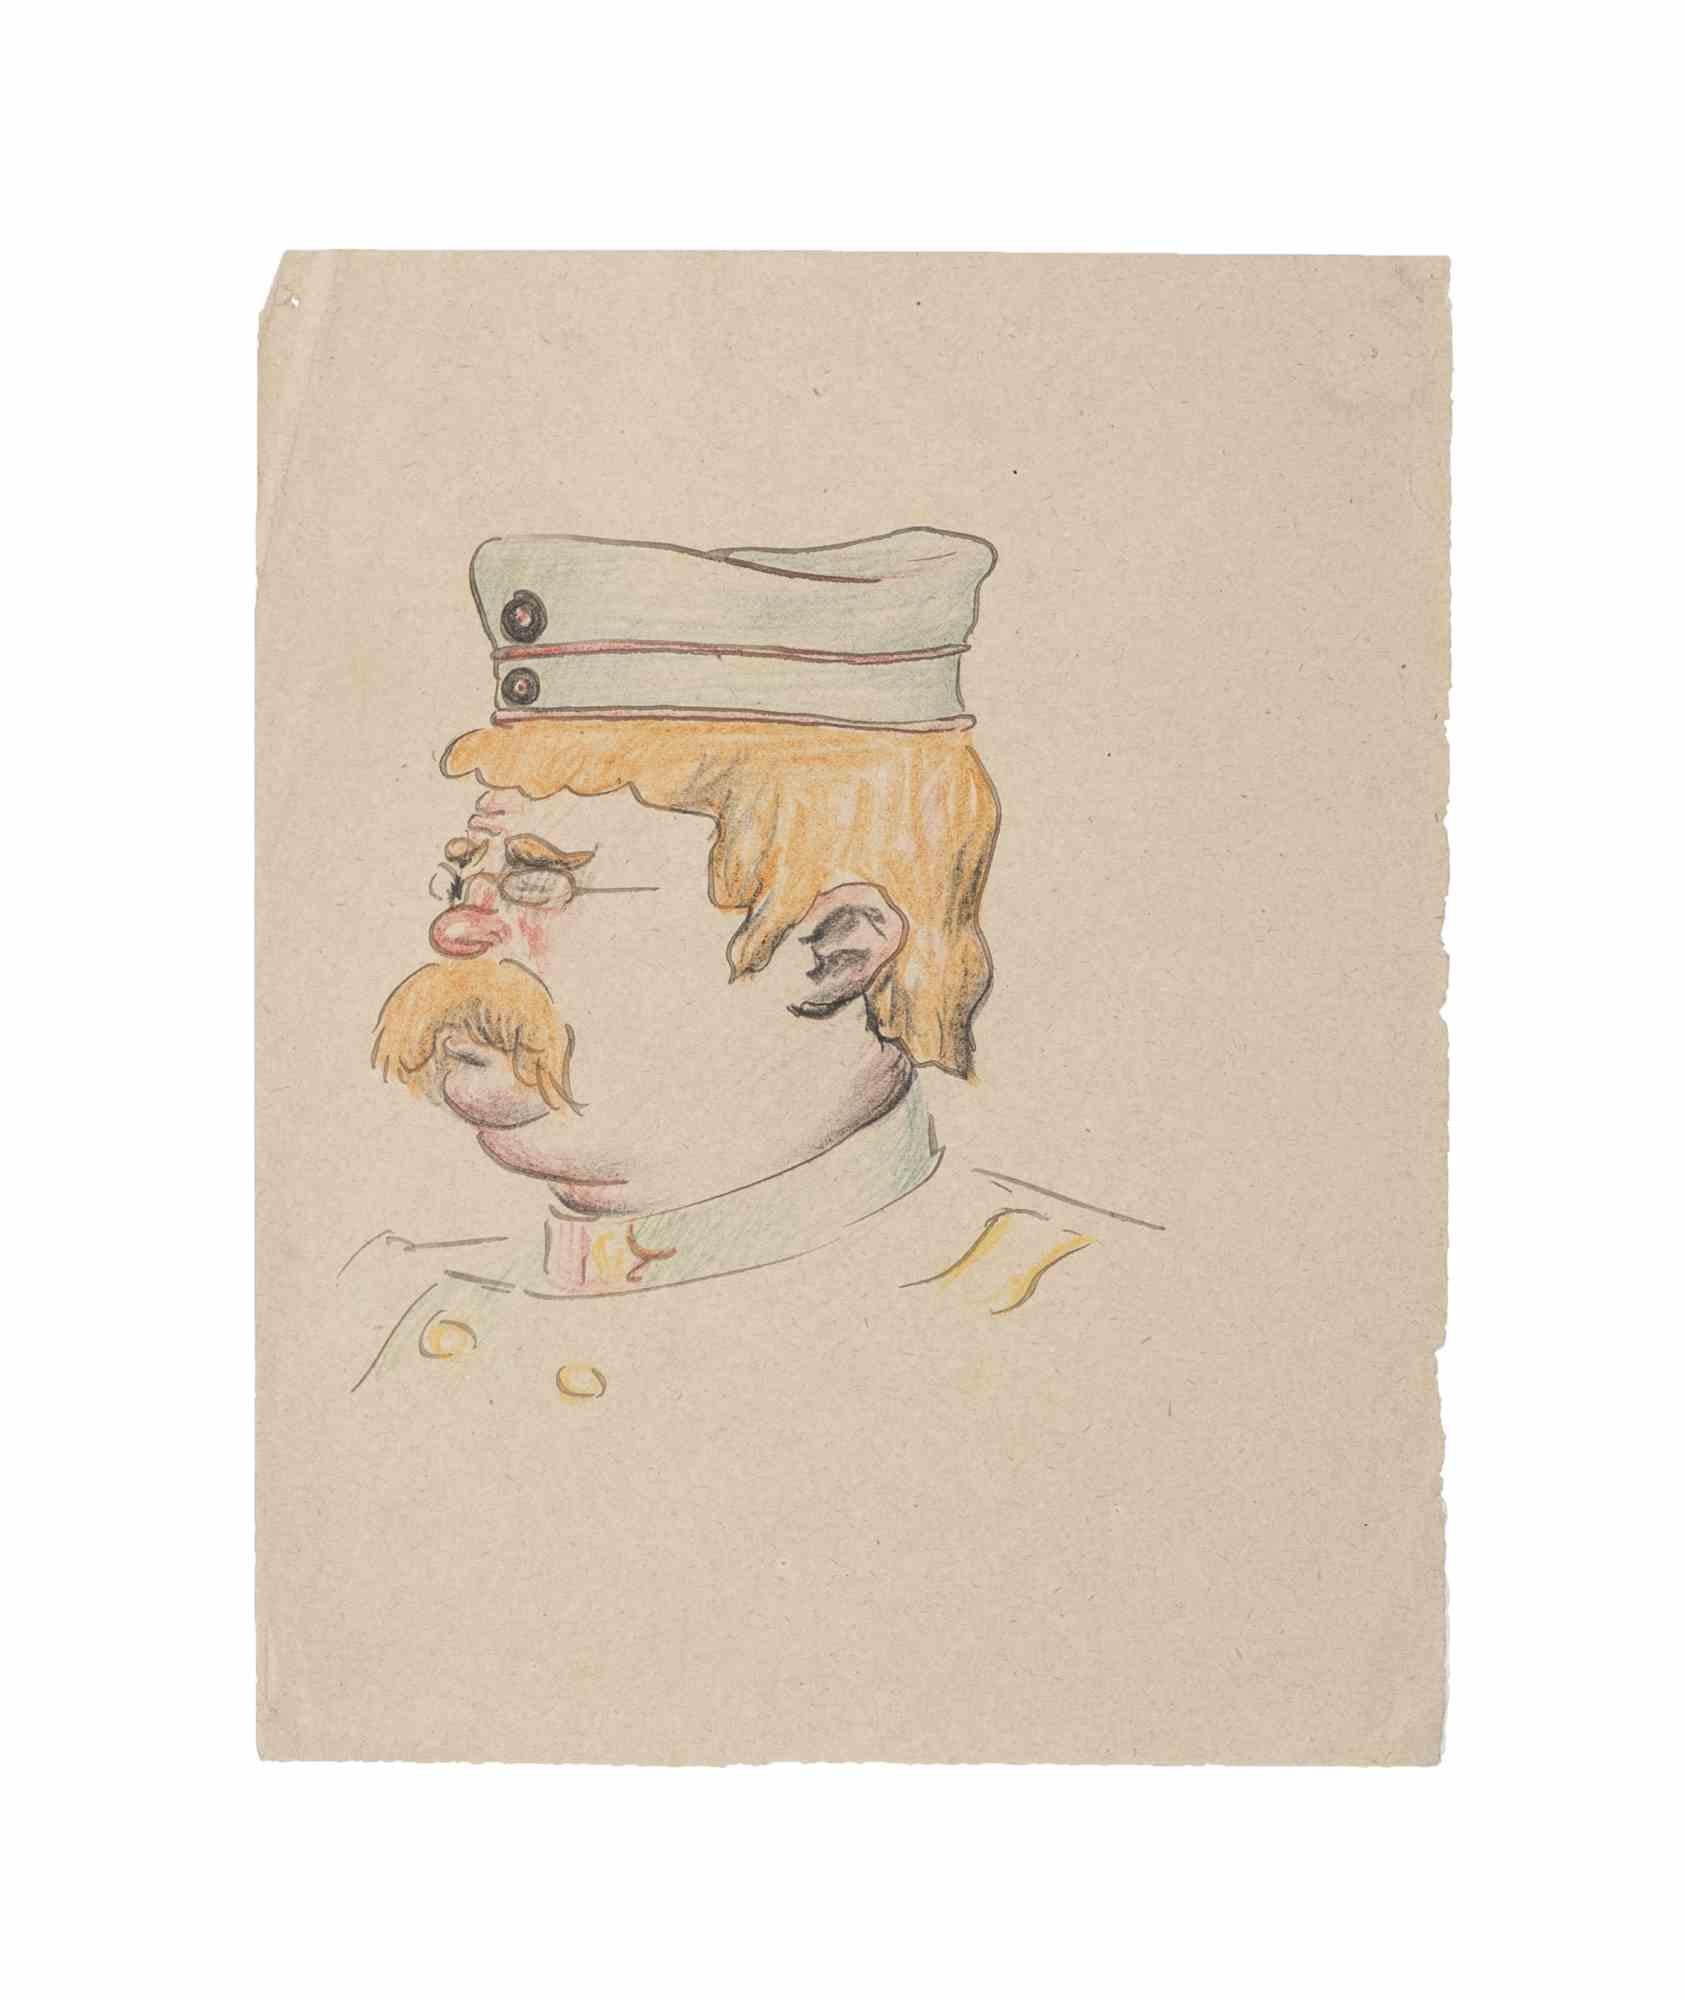 Unknown Figurative Art - Caricature - Original Drawing on Paper - Early 20th Century